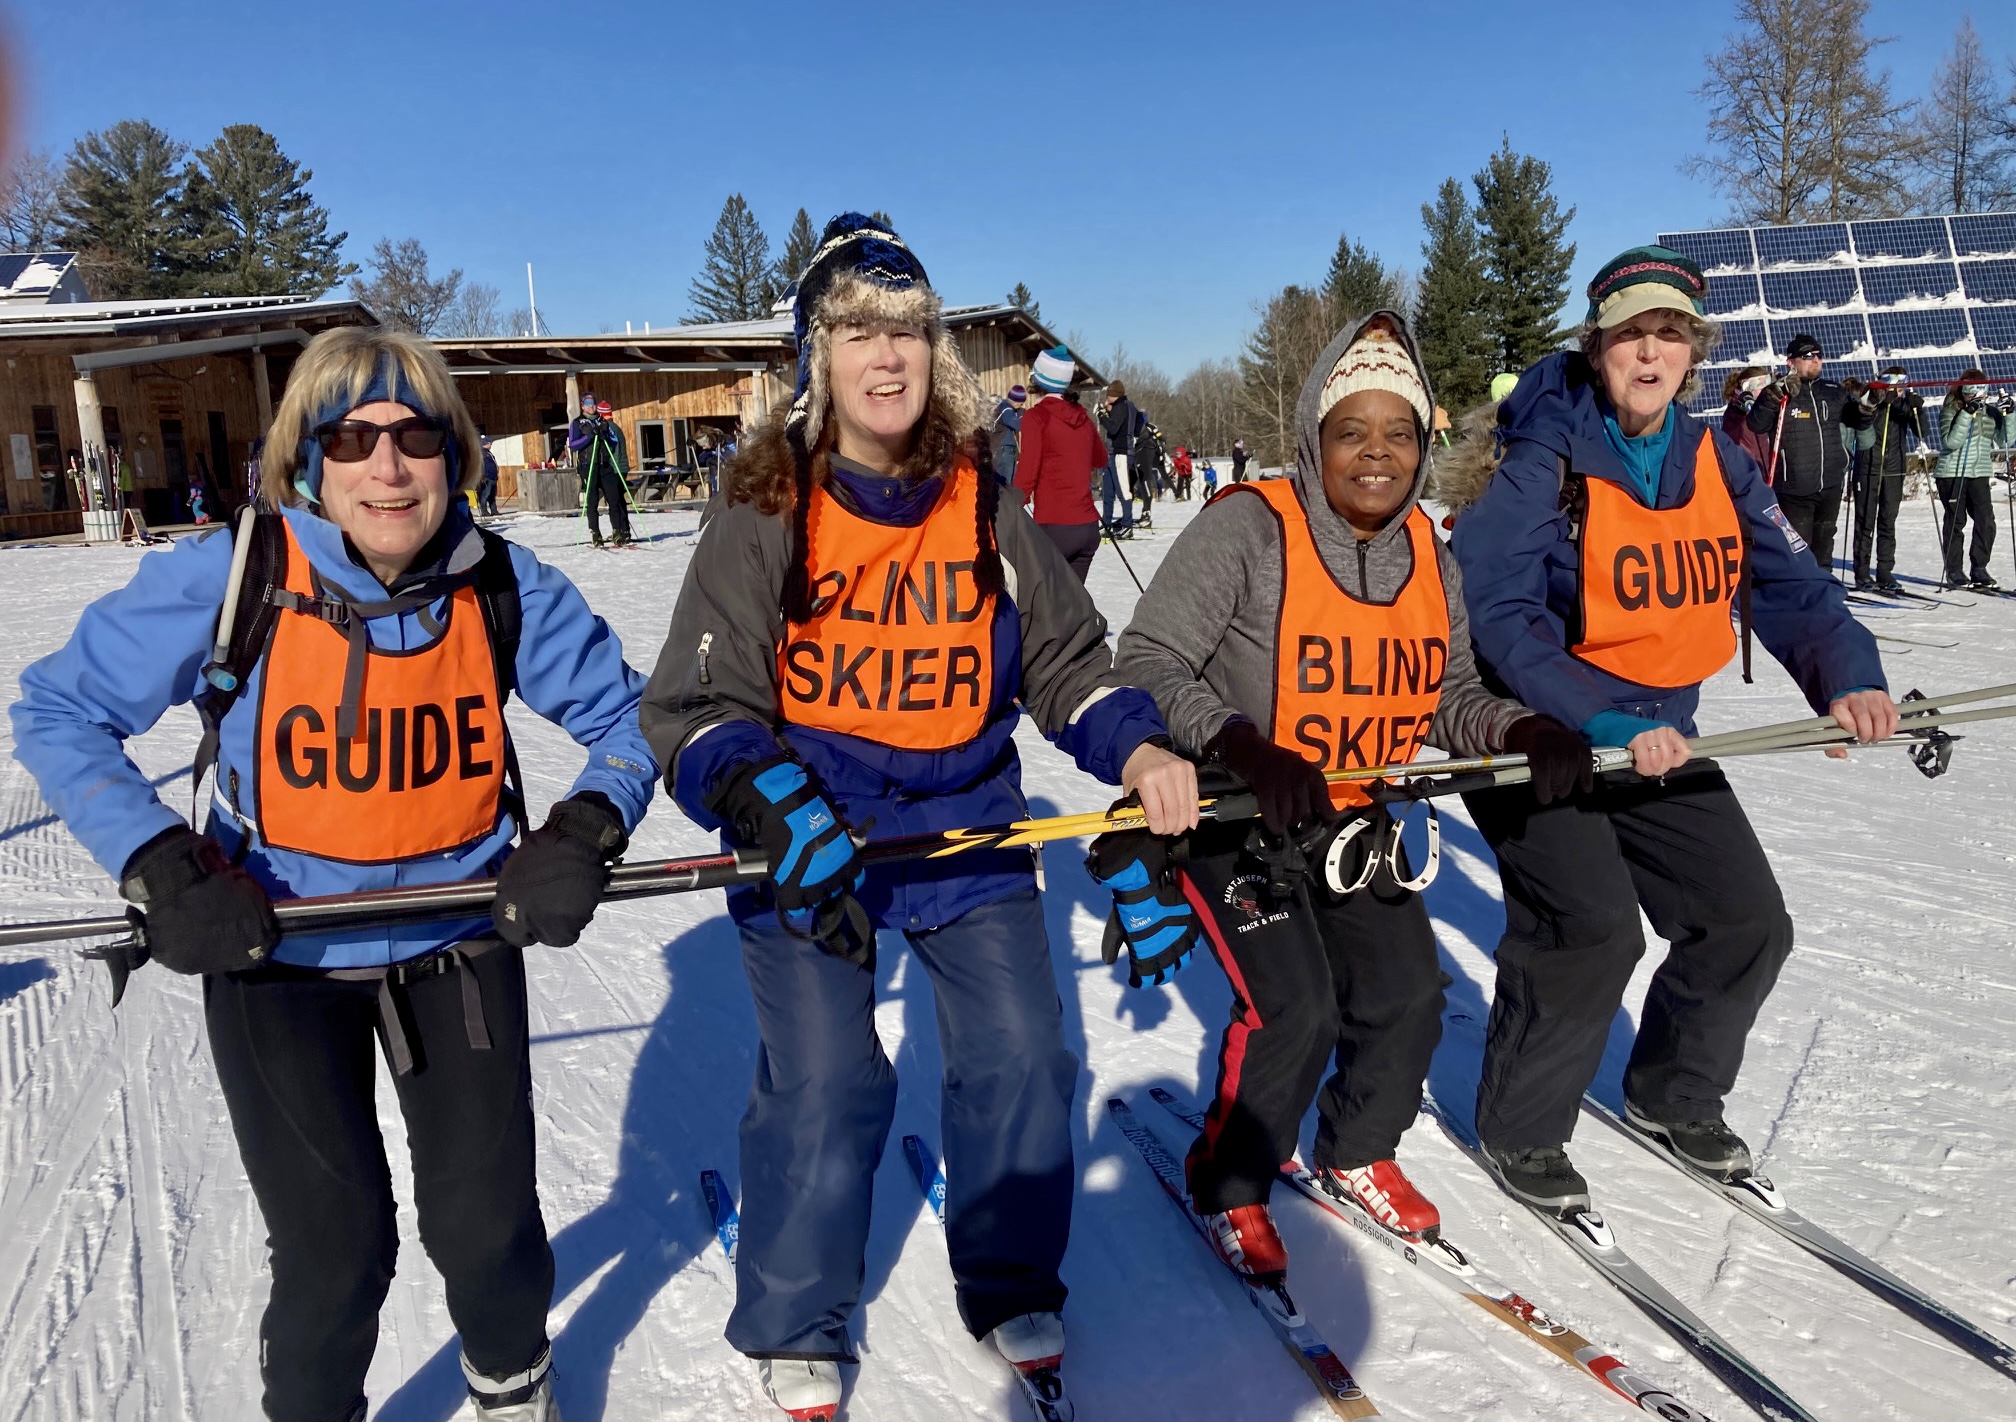 ALT TEXT PHOTO: A quartet of smiling skiers, wearing winter attire and skis, clutch interlinking ski poles held out in front of them. To the left stands Diane Manganaro, wearing a vibrant orange ski bib bearing the word 